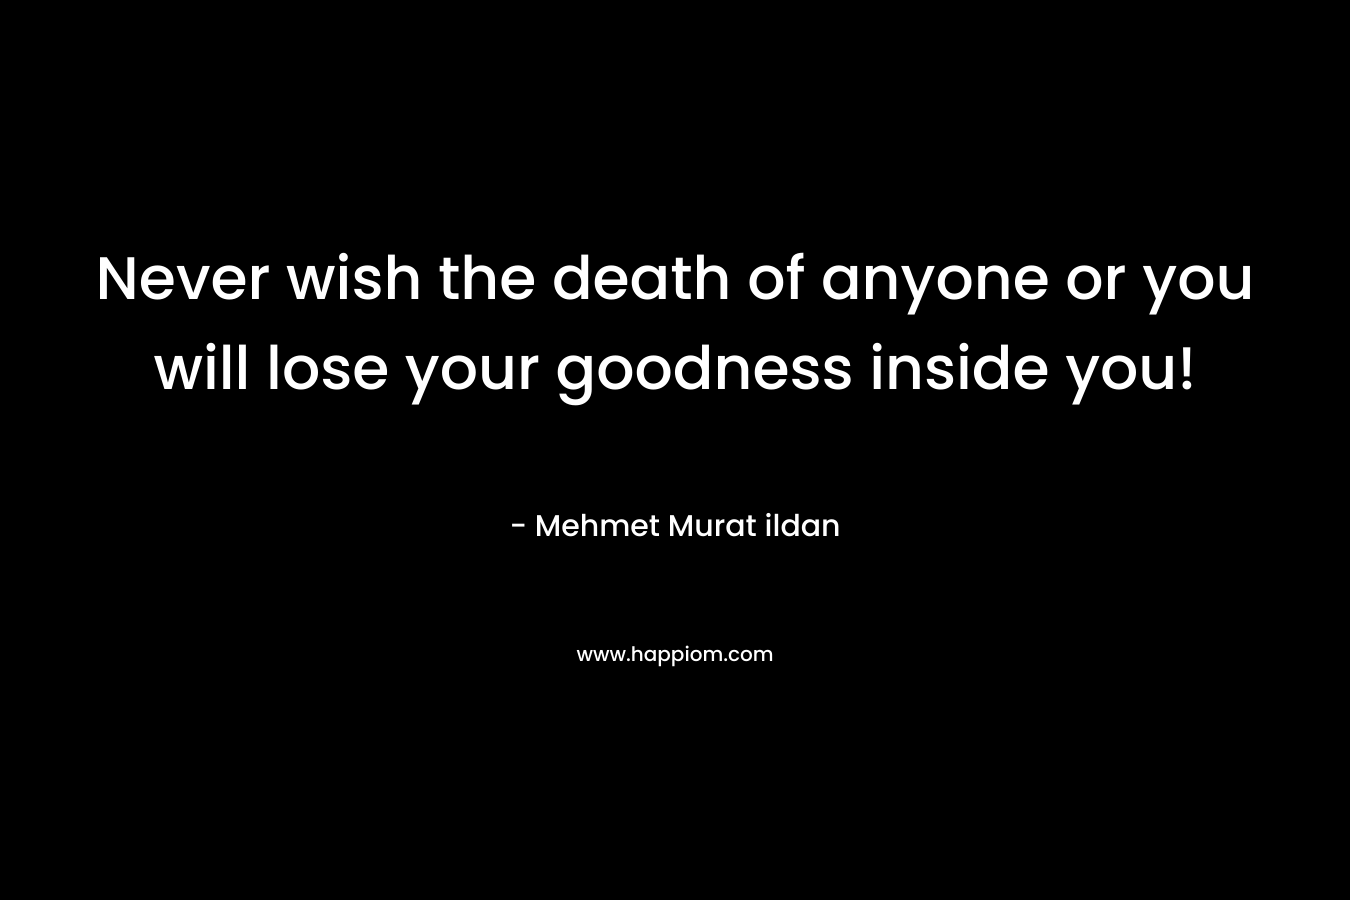 Never wish the death of anyone or you will lose your goodness inside you!